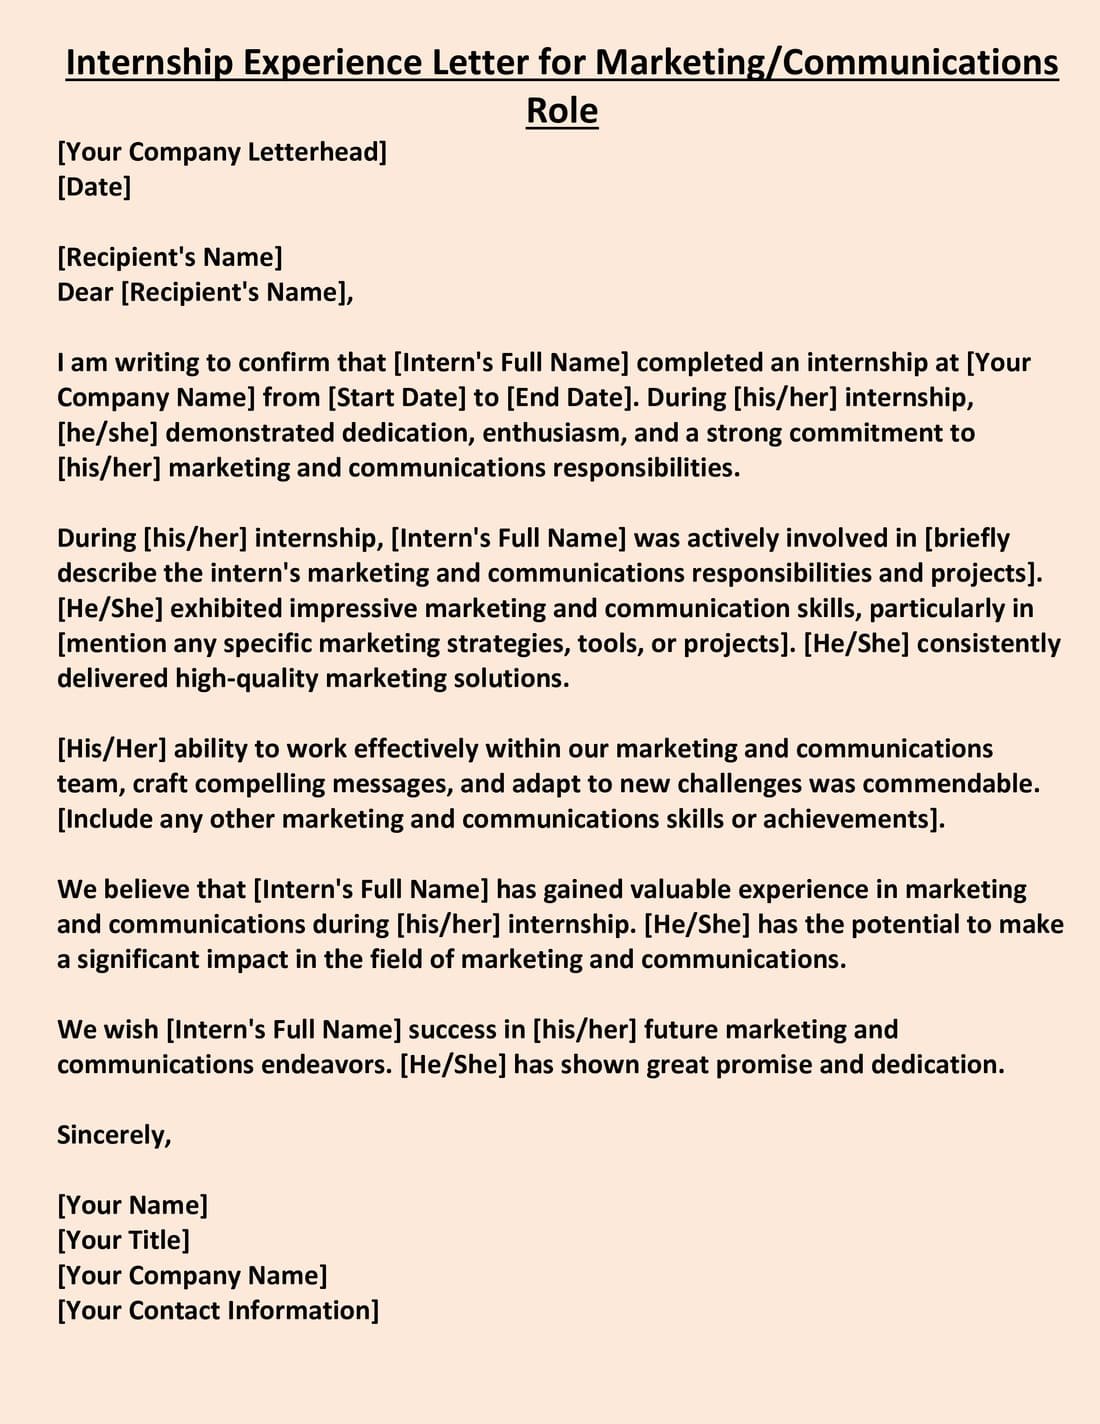 Internship Experience Letter for Marketing Communications Role